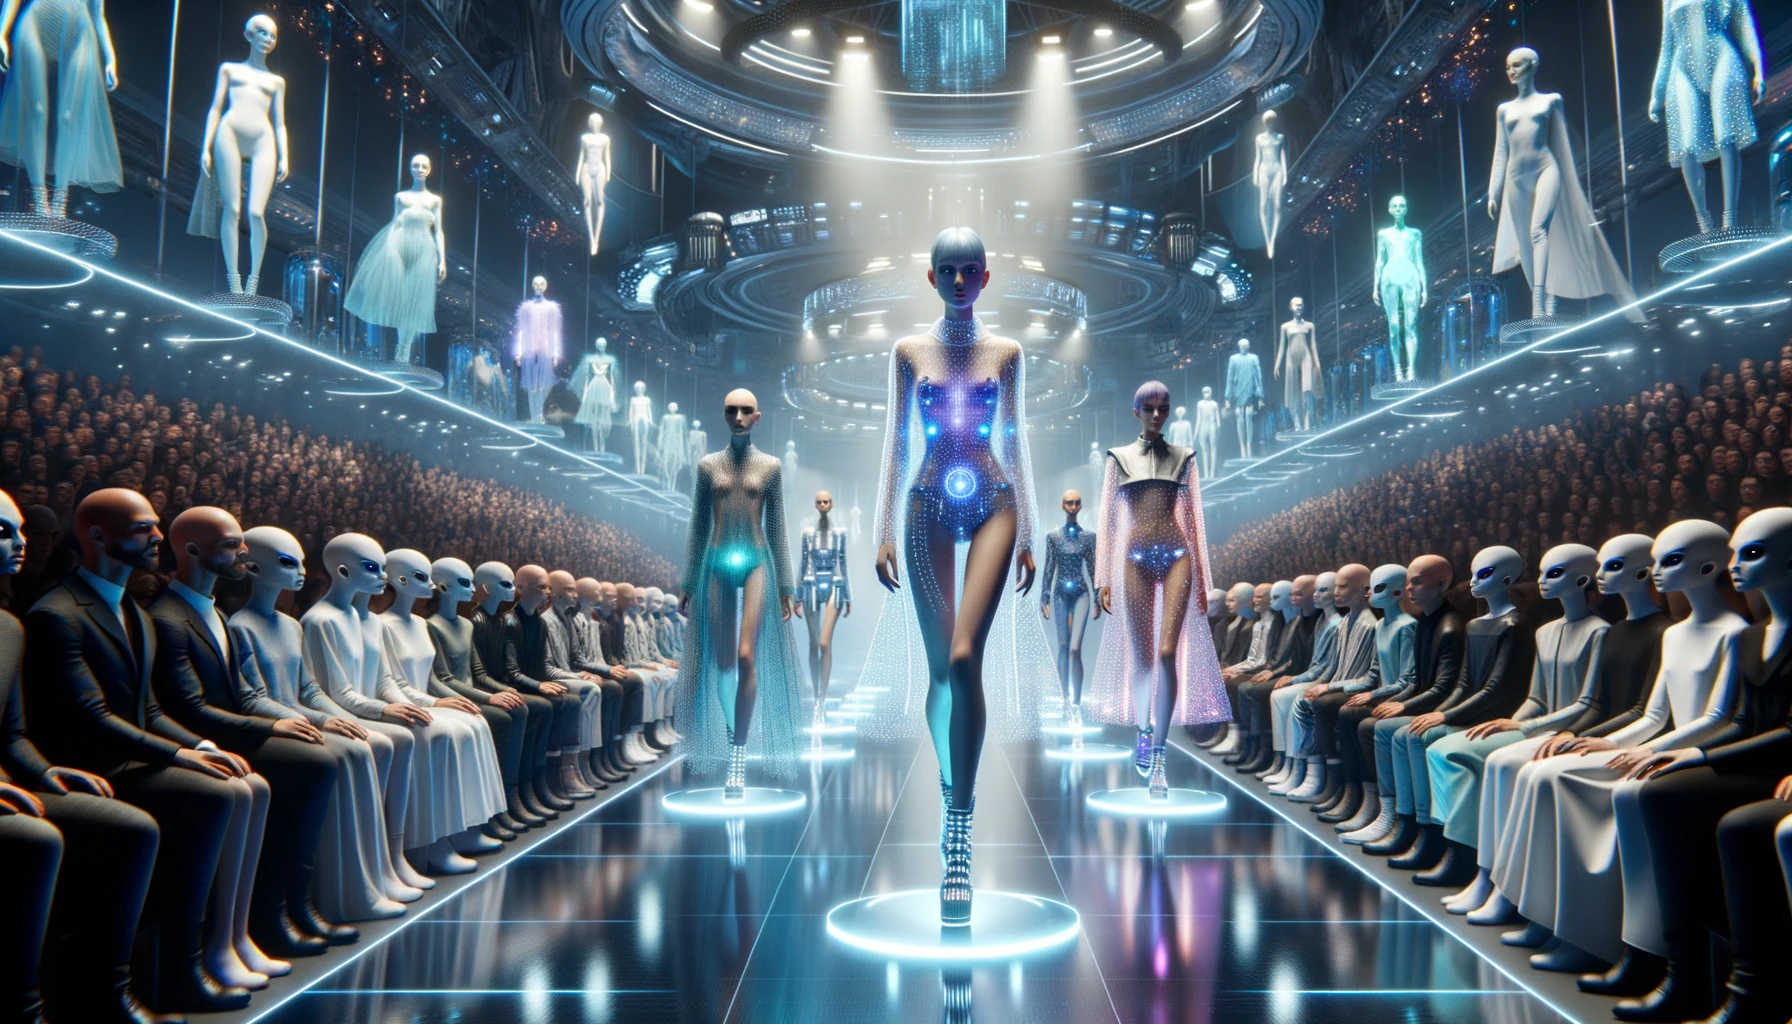 Photo of a fashion runway set in a futuristic world. Models, with confident strides, showcase cutting-edge attire made of pure light, interactive holograms, and eco-friendly materials. The designs play with luminescence, transparency, and texture, representing the pinnacle of future fashion. Watching intently are an audience made up of diverse humanoid aliens, their features and attire hinting at their extraterrestrial origins. Their expressions range from curiosity to admiration, reflecting their appreciation for the fashion on display.